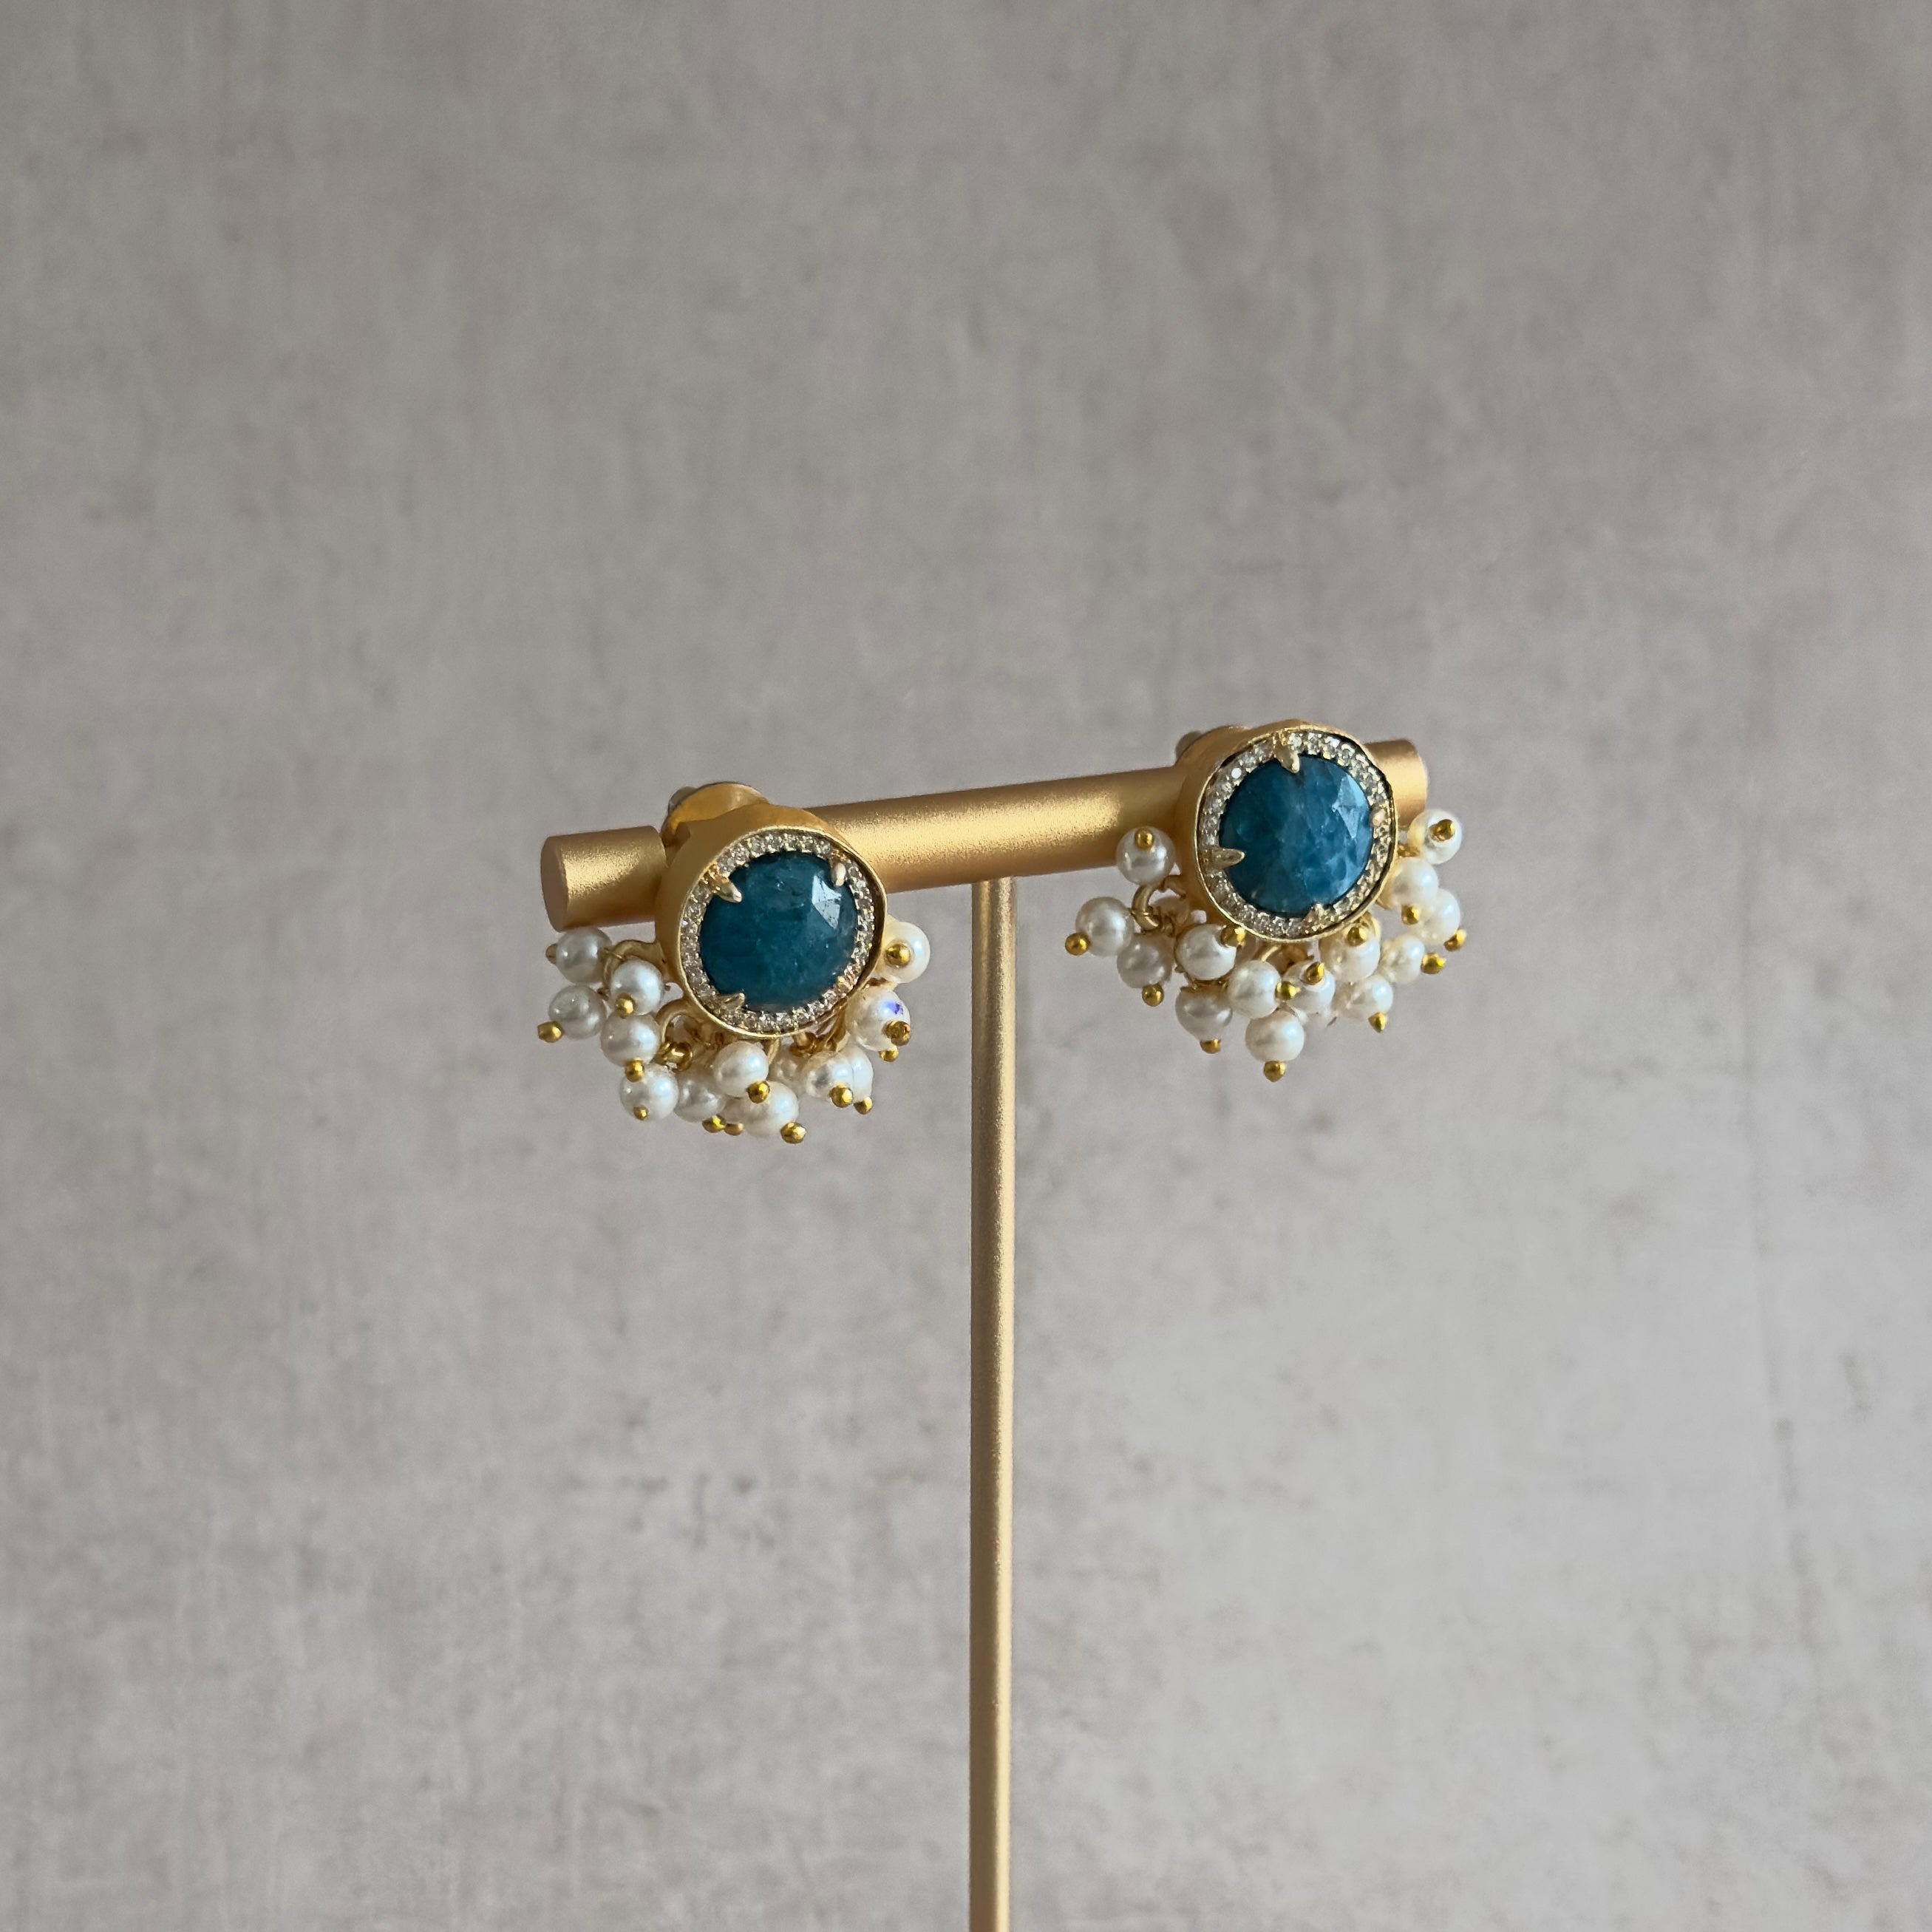 Elevate your style with our Indi Teal Stud Earrings. These earrings feature a classic stud design that adds timeless elegance to any outfit. Make a statement with confidence and sophistication.